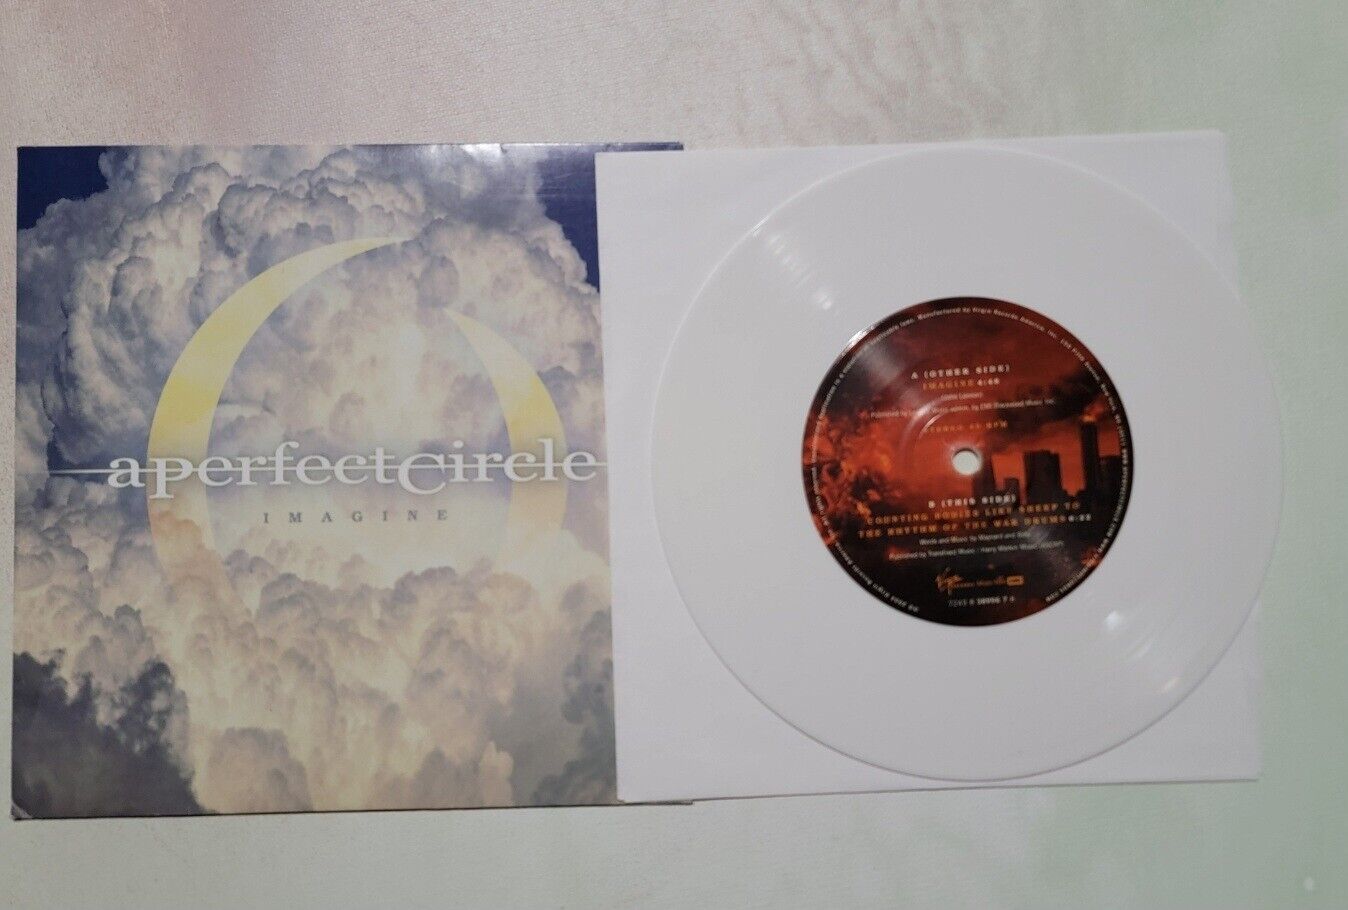 A Perfect Circle - Imagine ( 7") Vinyl  Limited Edition White